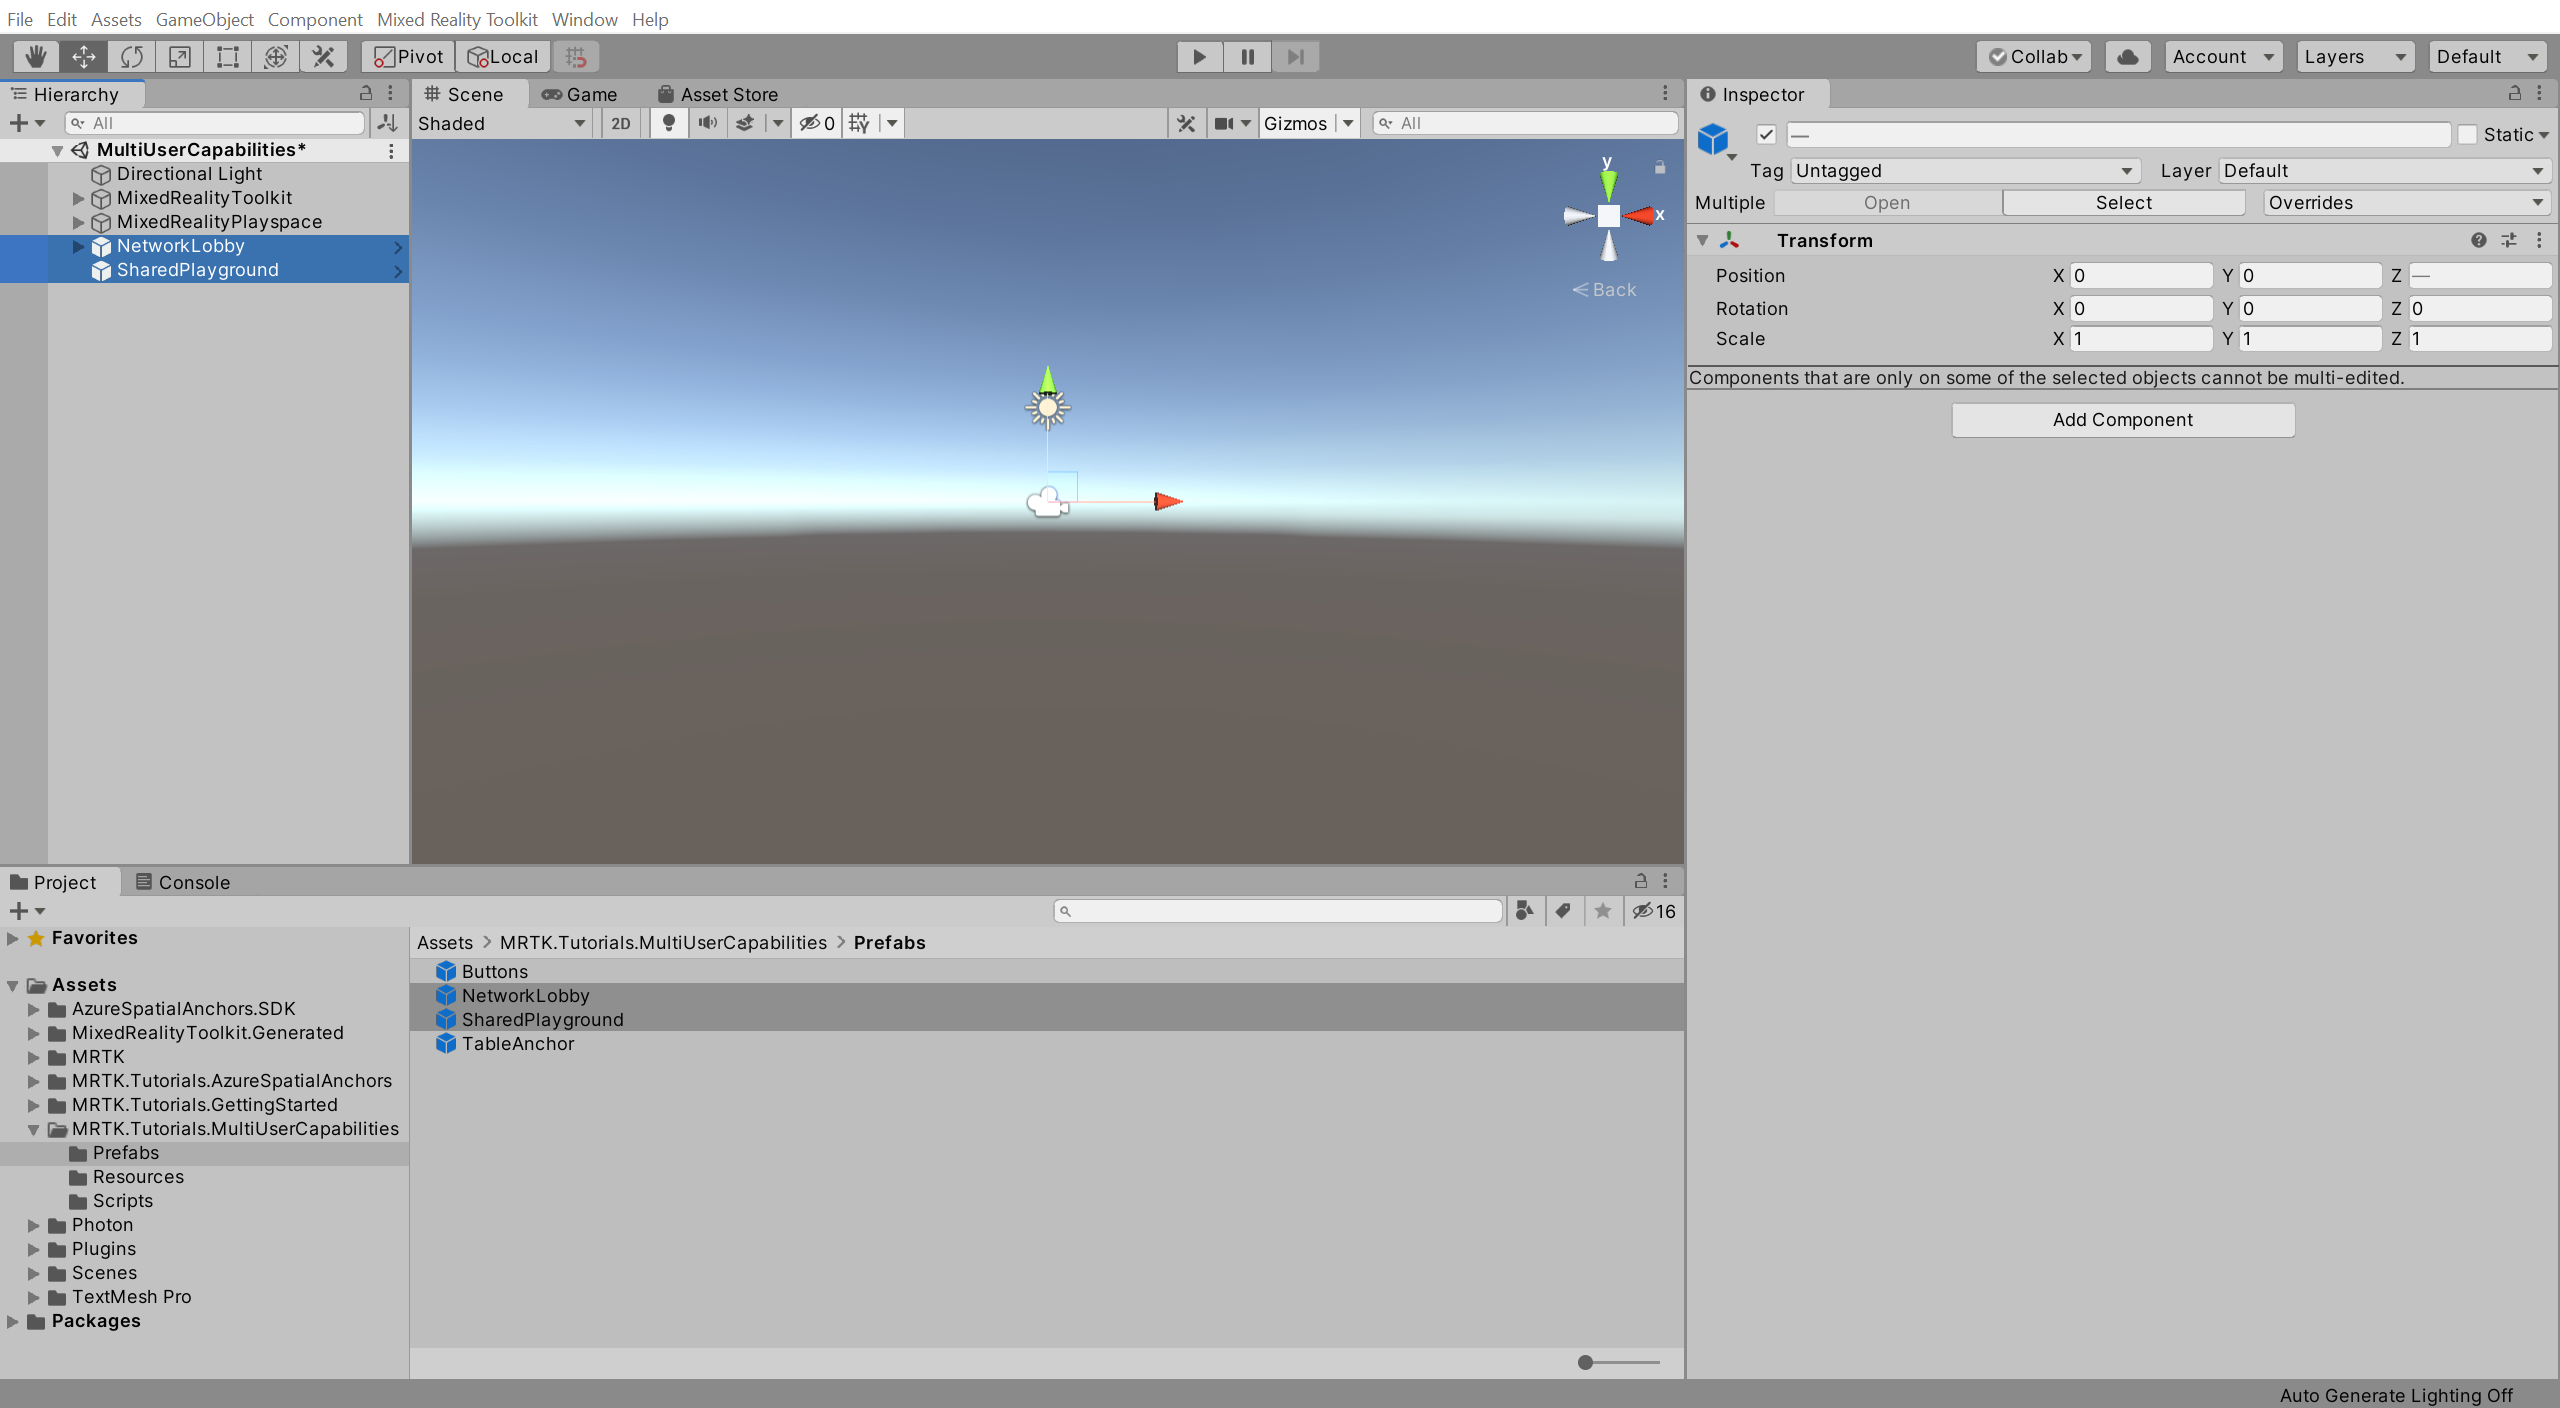 Unity with newly added NetworkLobby and SharedPlayground prefabs selected